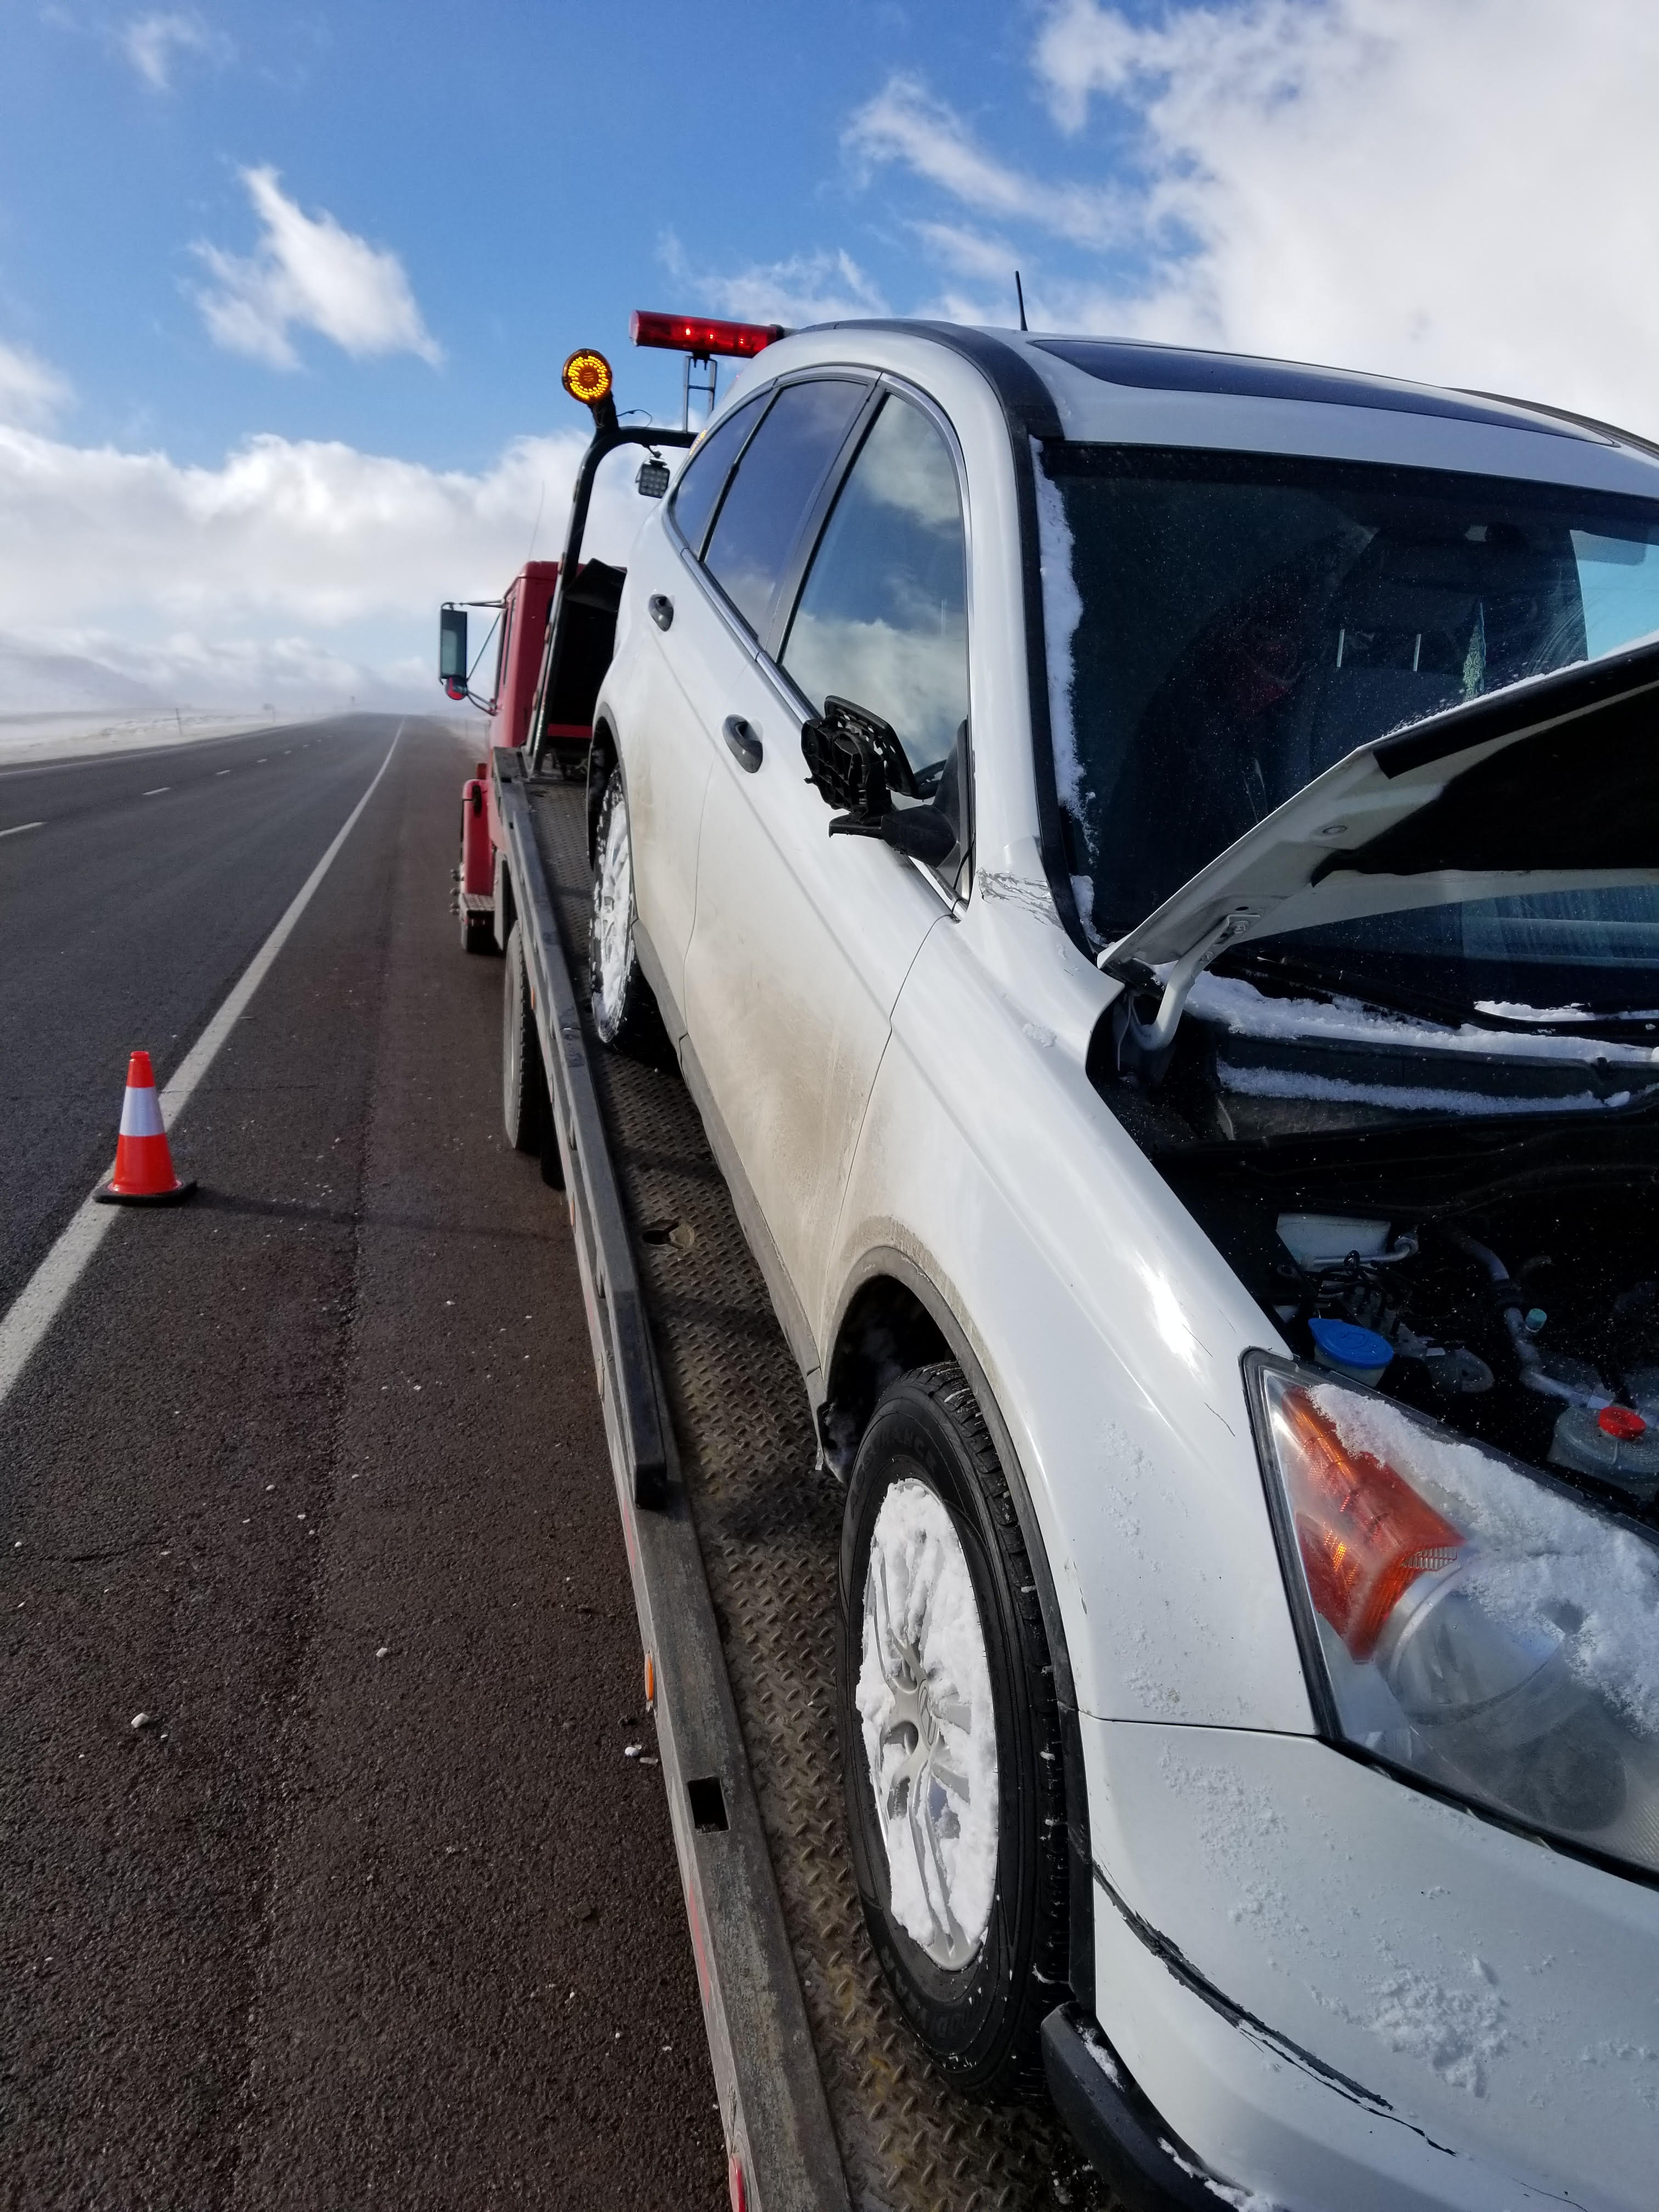 Crossroads Towing and Recovery LLC | Medicine Bow, WY | (307) 680-9037 | 24-Hour Towing | Light Duty Towing | Medium Duty Towing | Roadside Assistance | Lockouts | Tire Changes | Jump Starts | Motorcycle Towing | Flatbed Towing | Vehicle Transport | Winching & Extraction | Police Rotation | Post Accident Clean Up